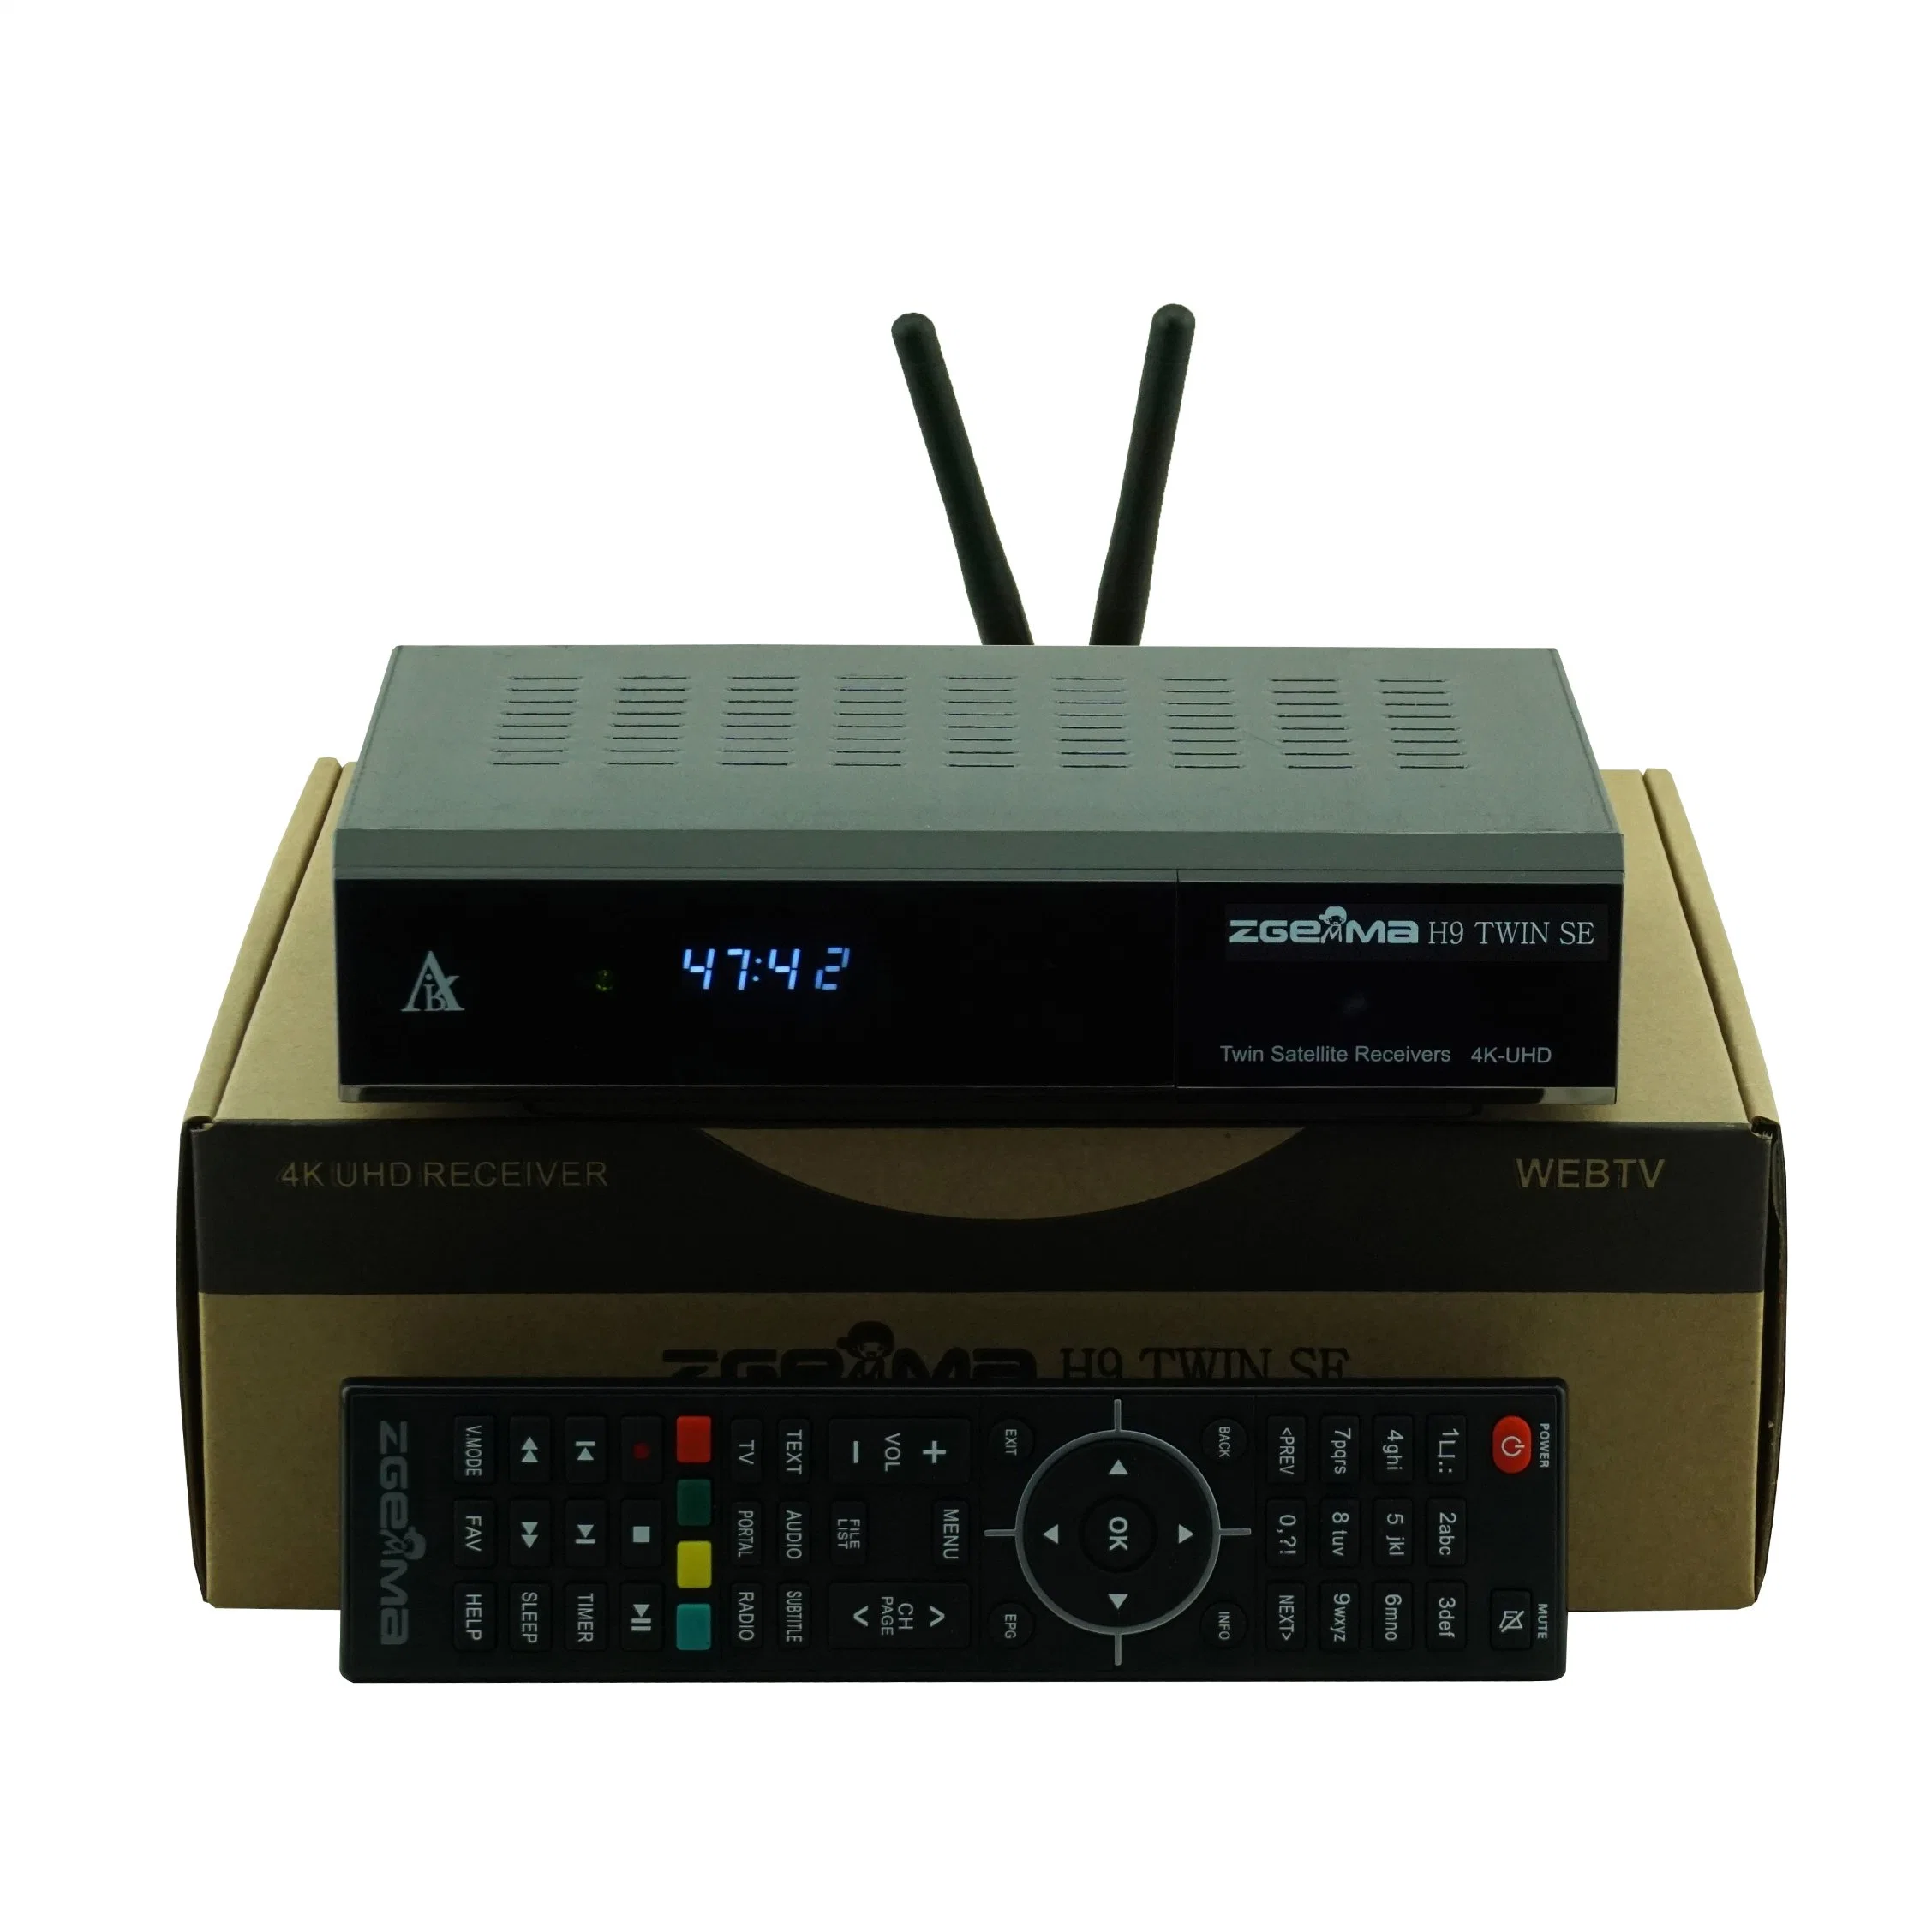 Zgemma H9 Twin Se: Built-in DVB-S2X+DVB-S2X Twin Tuner Supporting 4K-2160p - Enigma2 Linux + Android OS